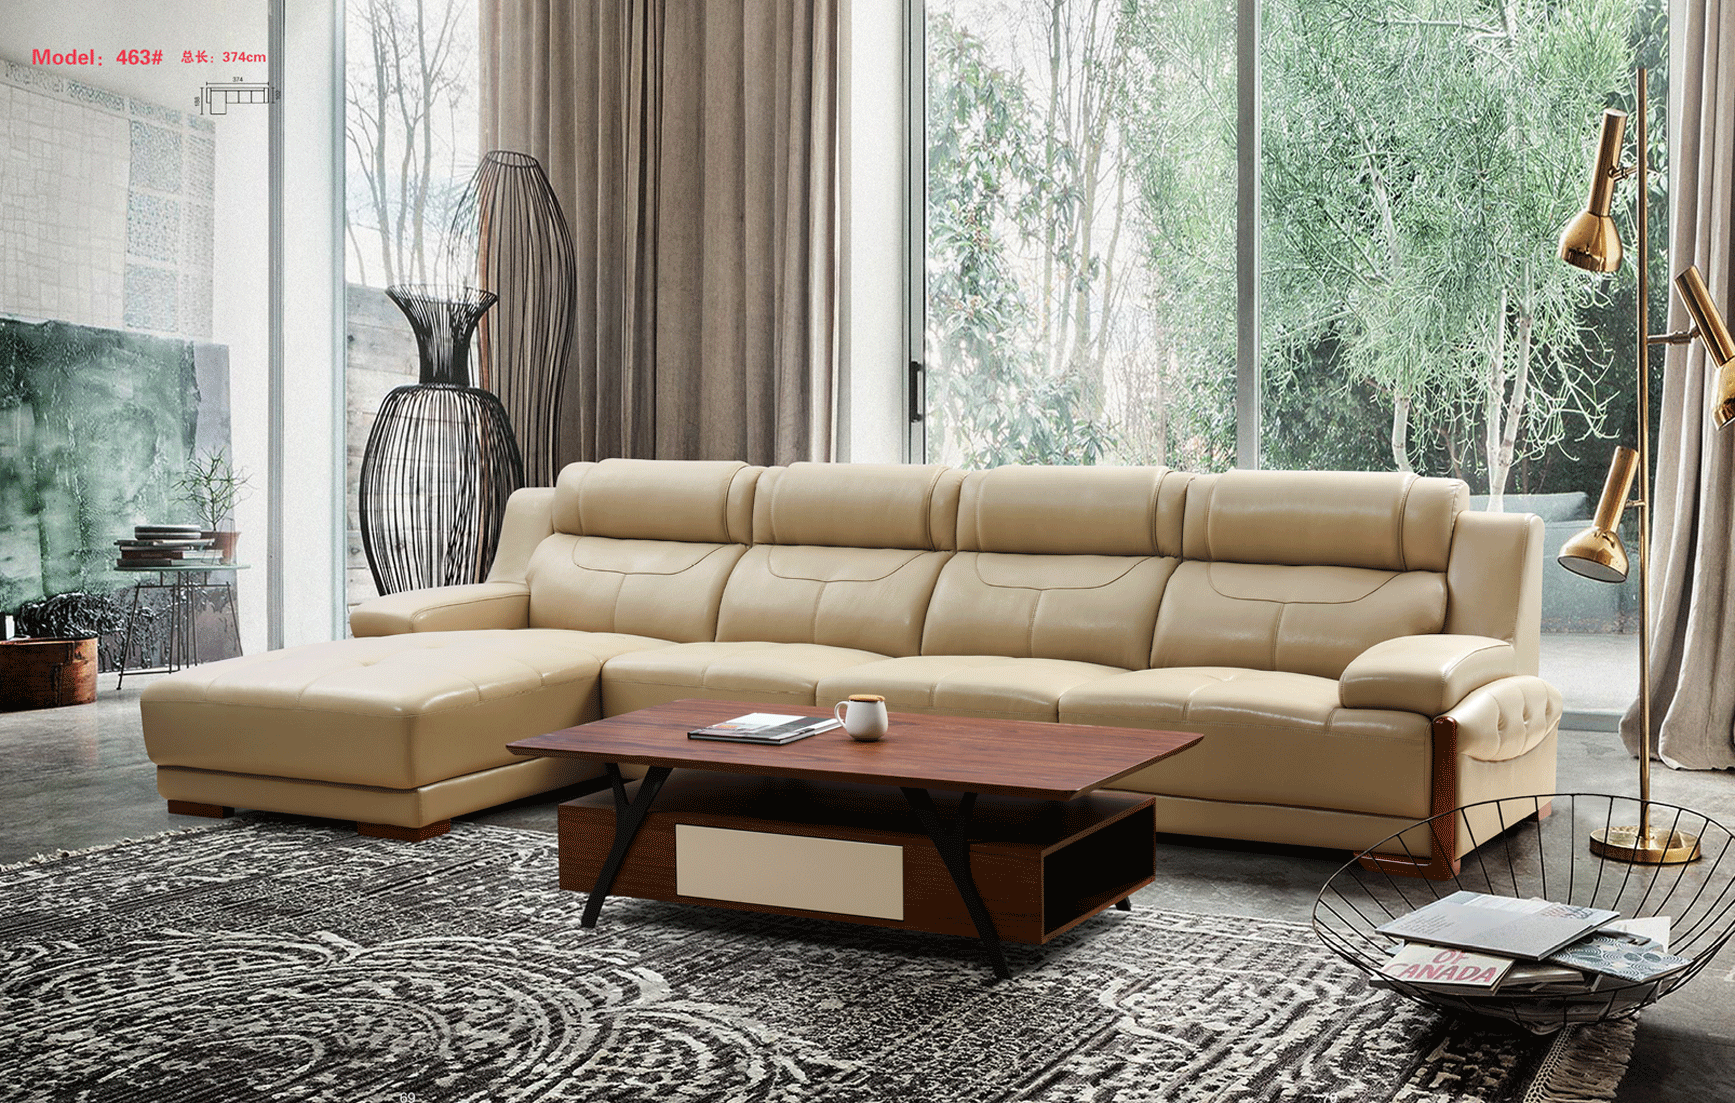 Brands WCH Modern Living Special Order 463 Sectional